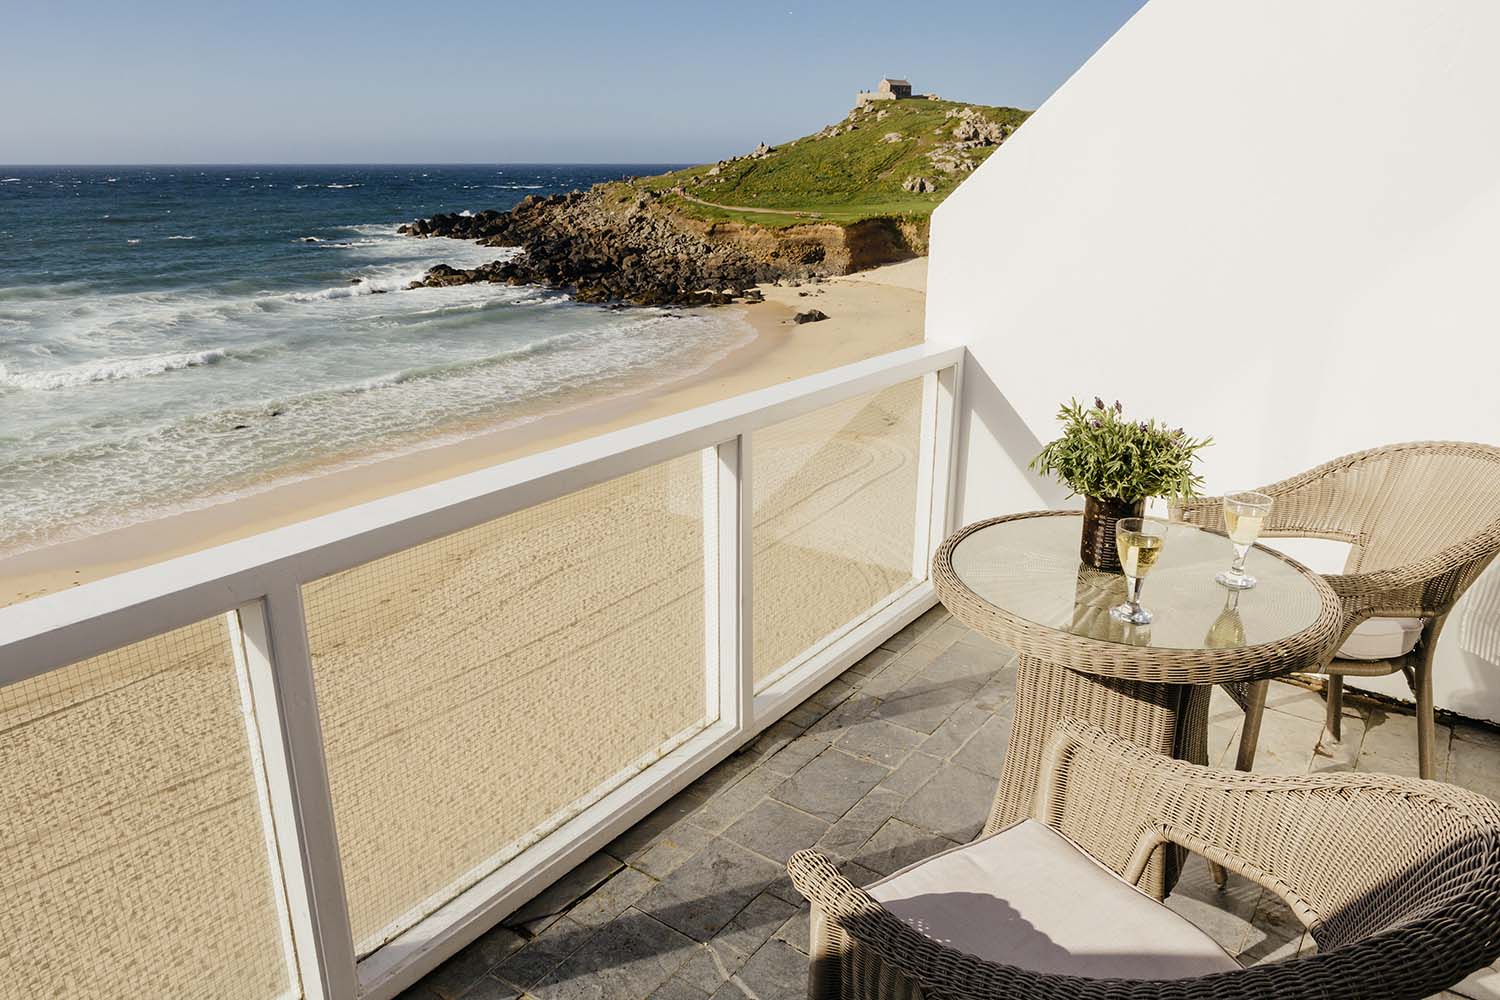 Porthmeor balcony with table and chairs